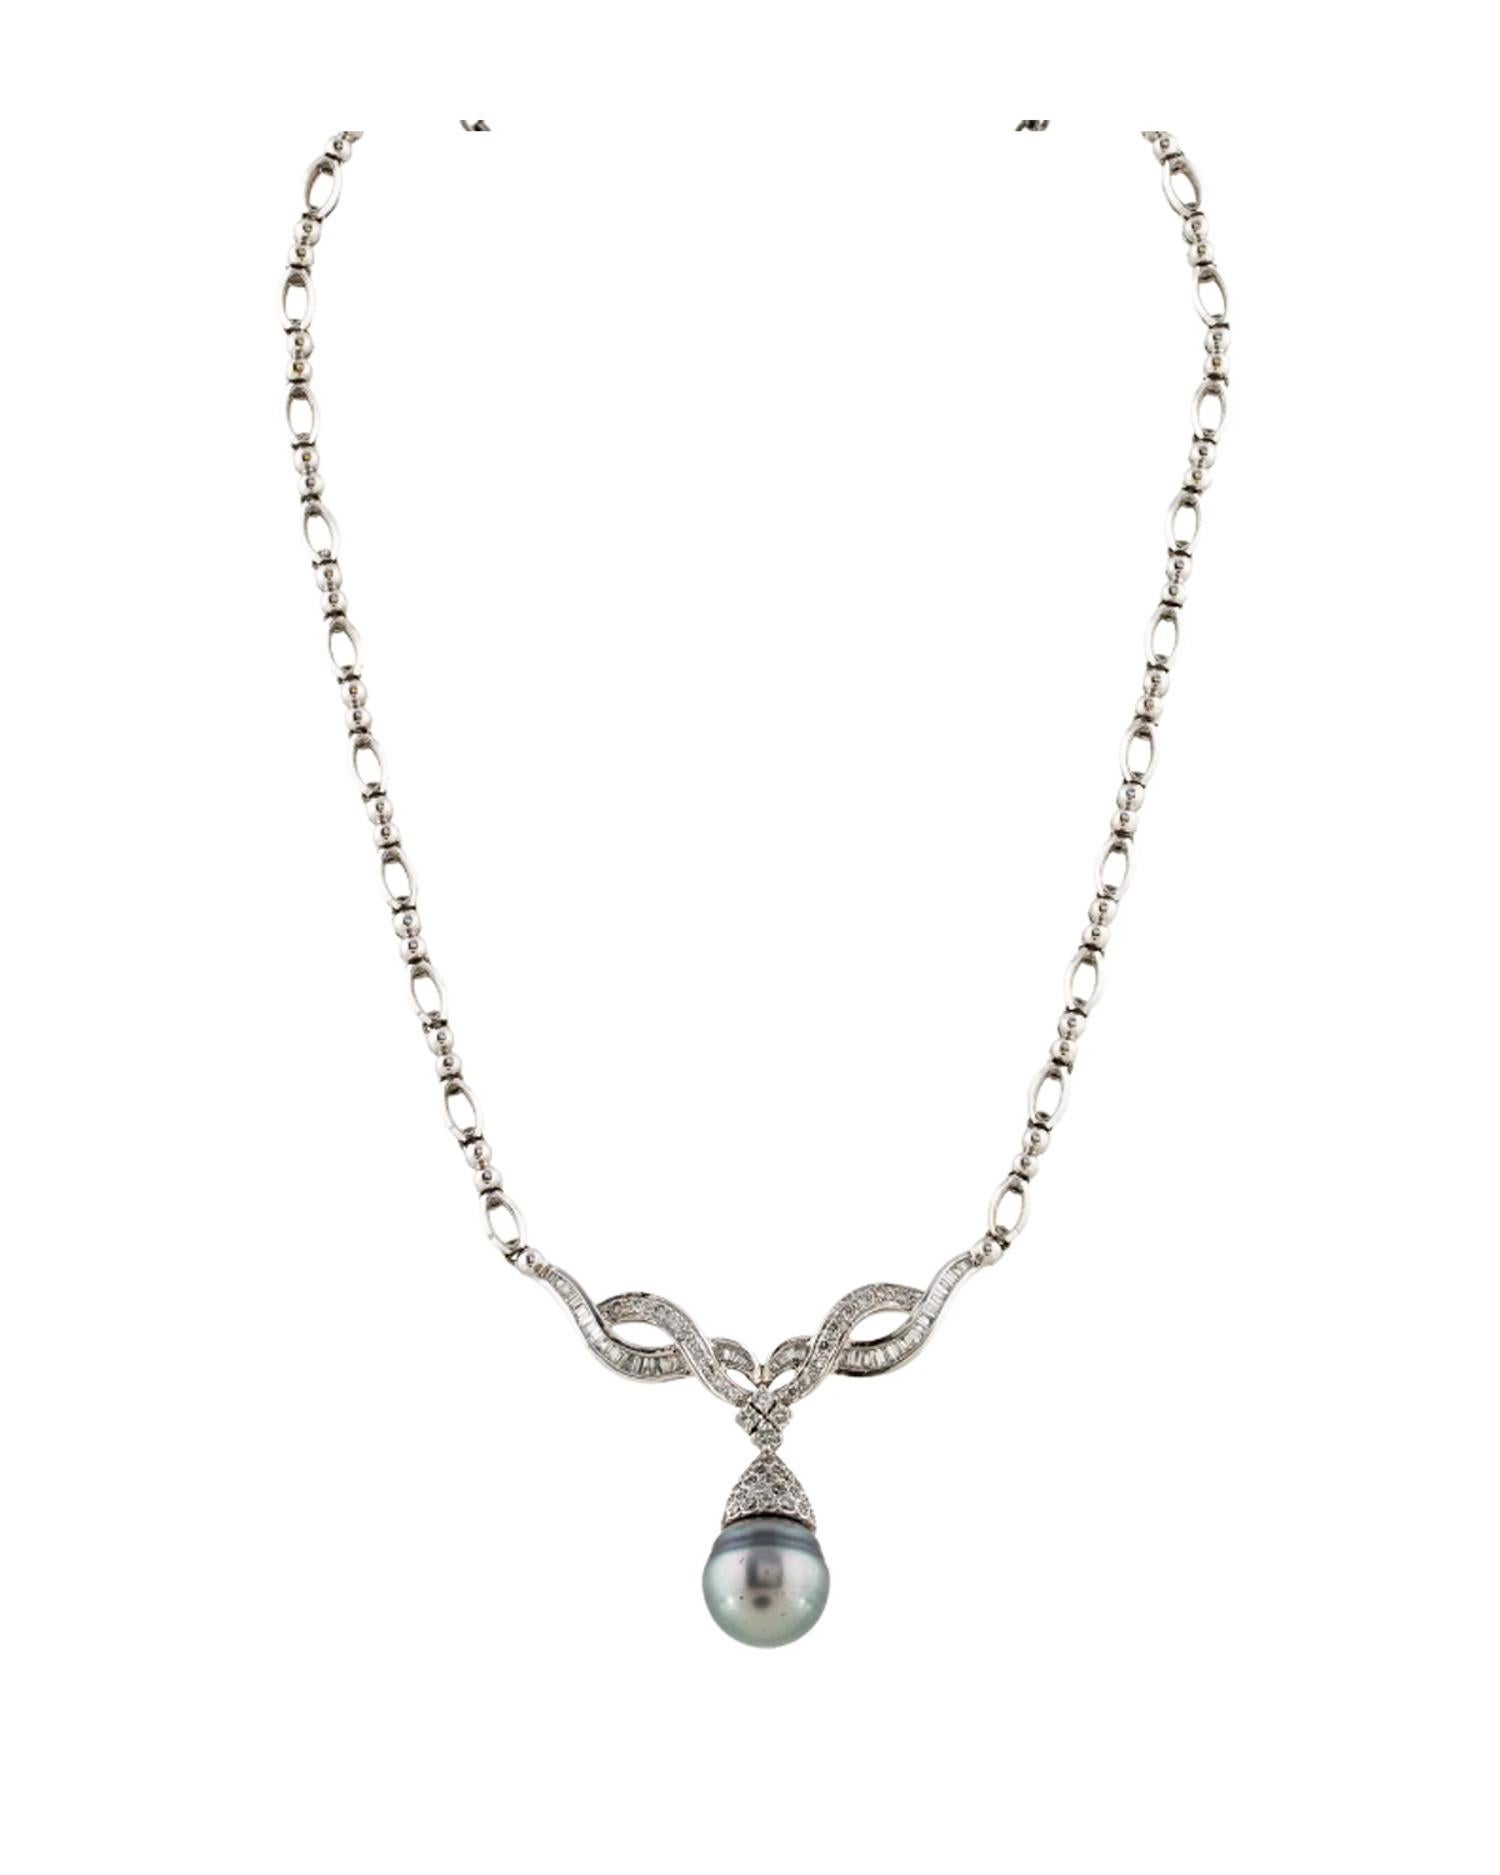 18 kt white gold diamond and pearl necklace featuring a center 14.00 mm pearl held by a holder adorned with 2.42 cts tw of diamonds
Diana M. is a leading supplier of top-quality fine jewelry for over 35 years.
Diana M is one-stop shop for all your